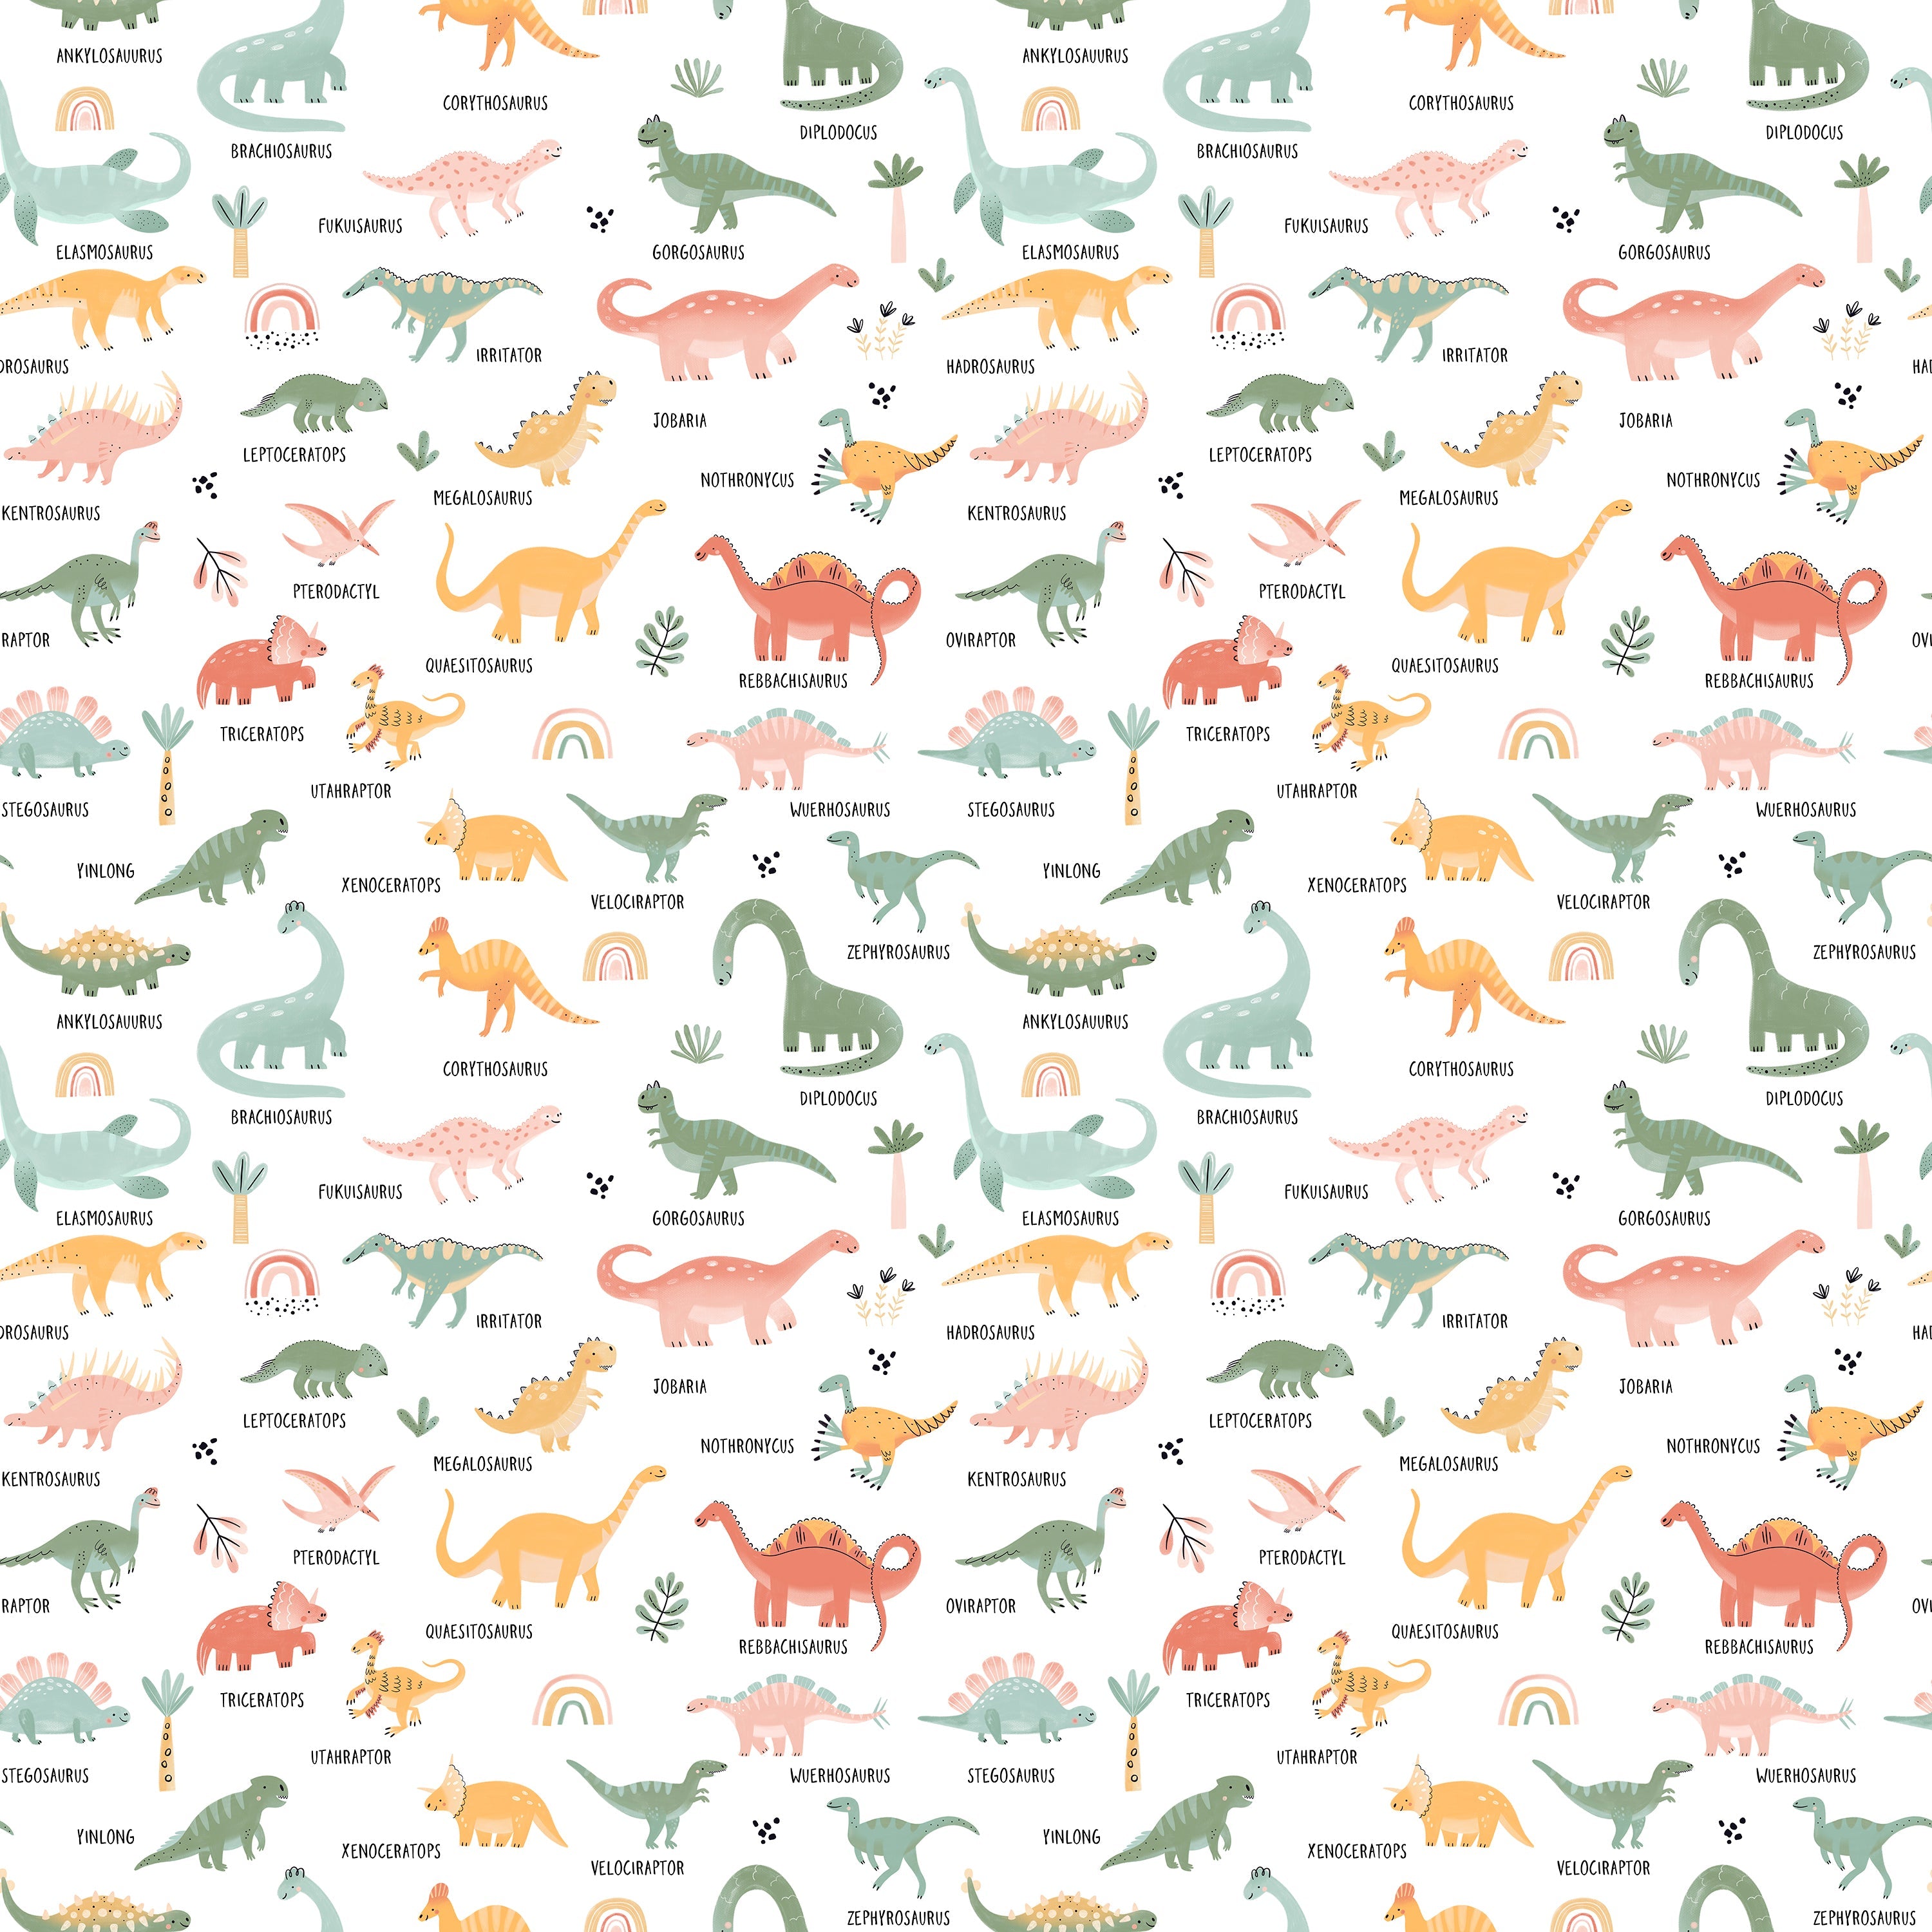 A colorful and educational wallpaper featuring a variety of dinosaurs named in a playful font. Each dinosaur is uniquely styled and colored, ranging from greens, oranges, to pinks, set against a white background with additional decorative elements like trees and abstract shapes.